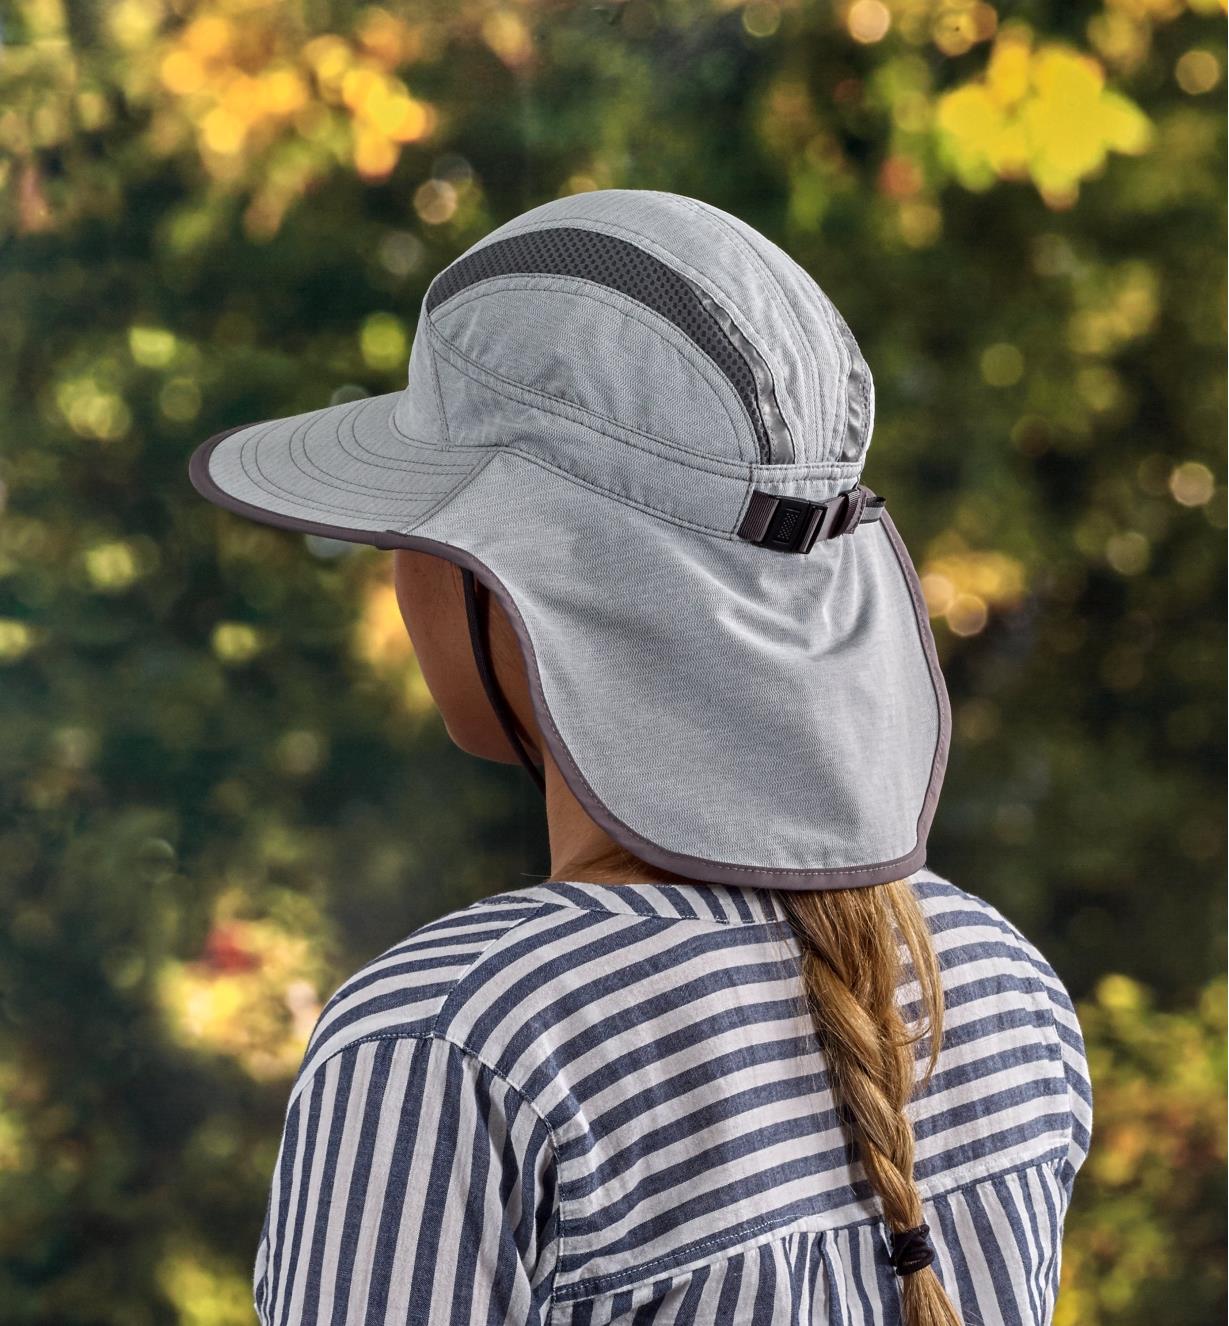 Back view of a woman wearing a light gray adventure sun hat